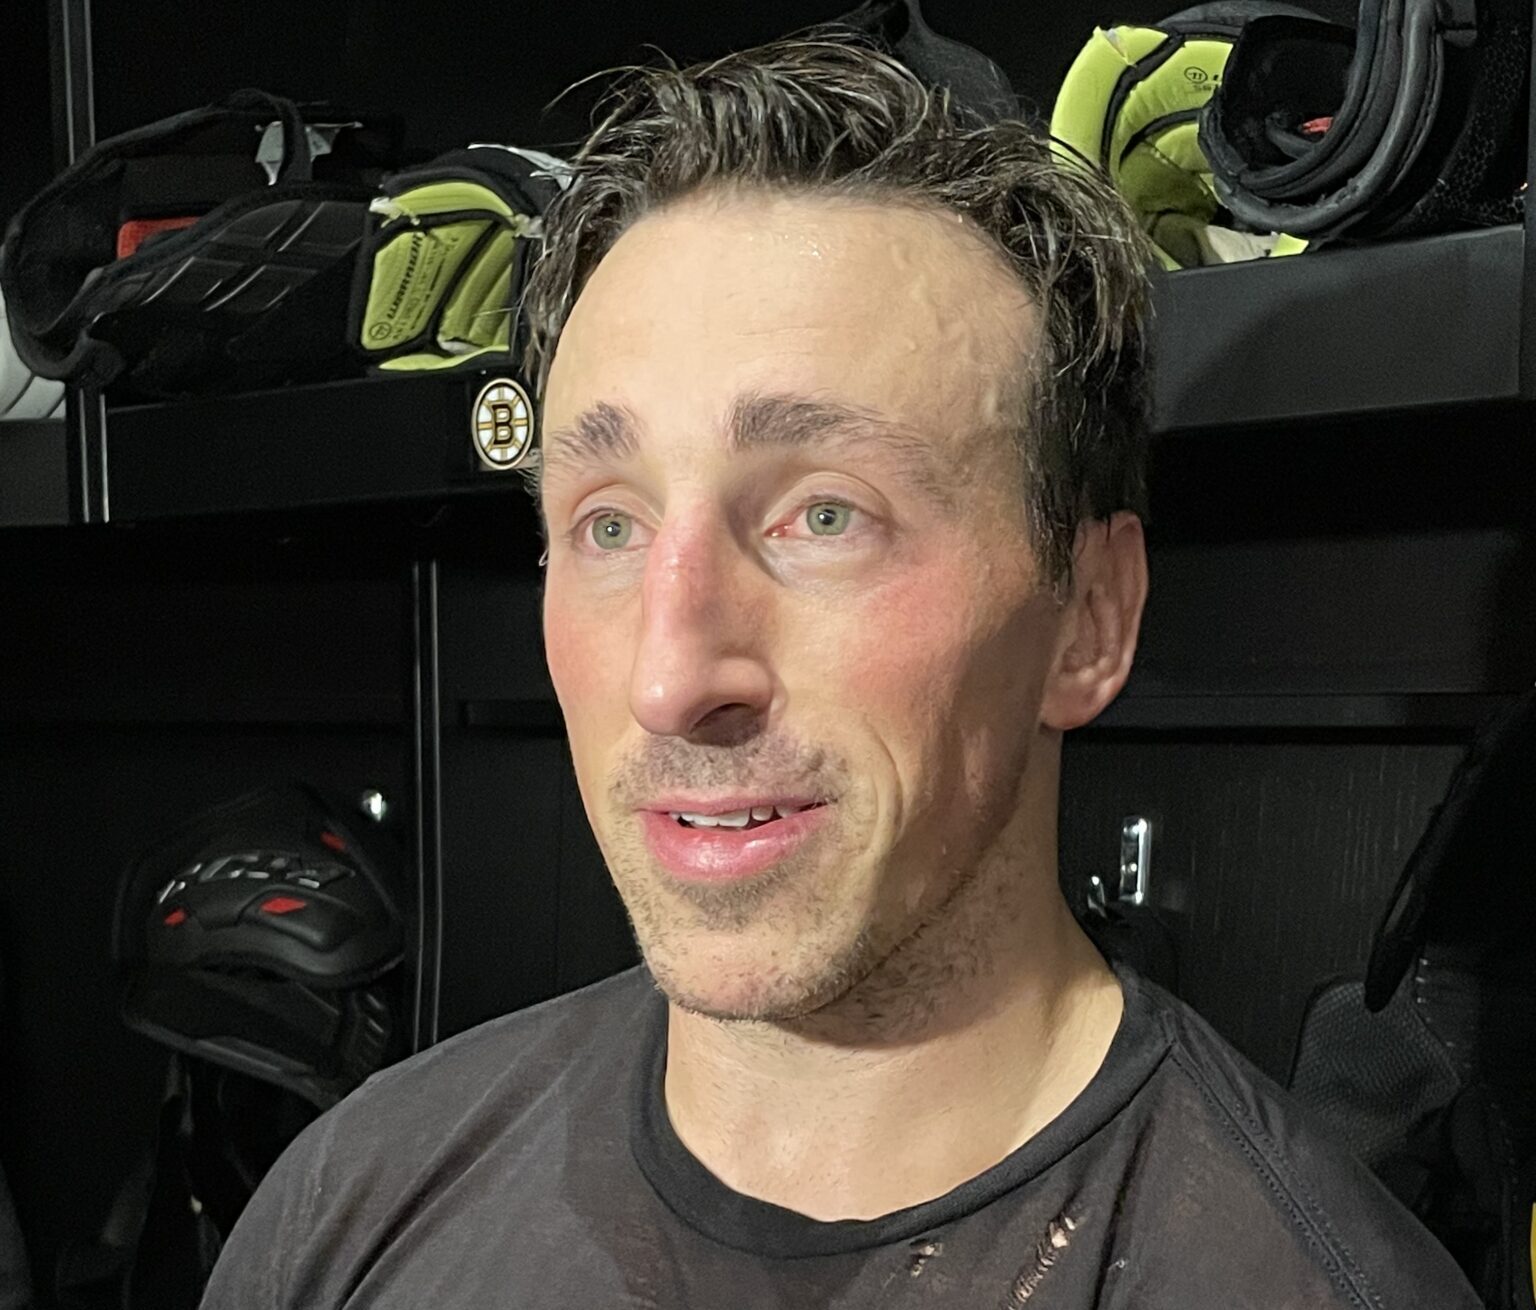 Marchand On Bruins’ Loss: ‘We Took Them Lightly’